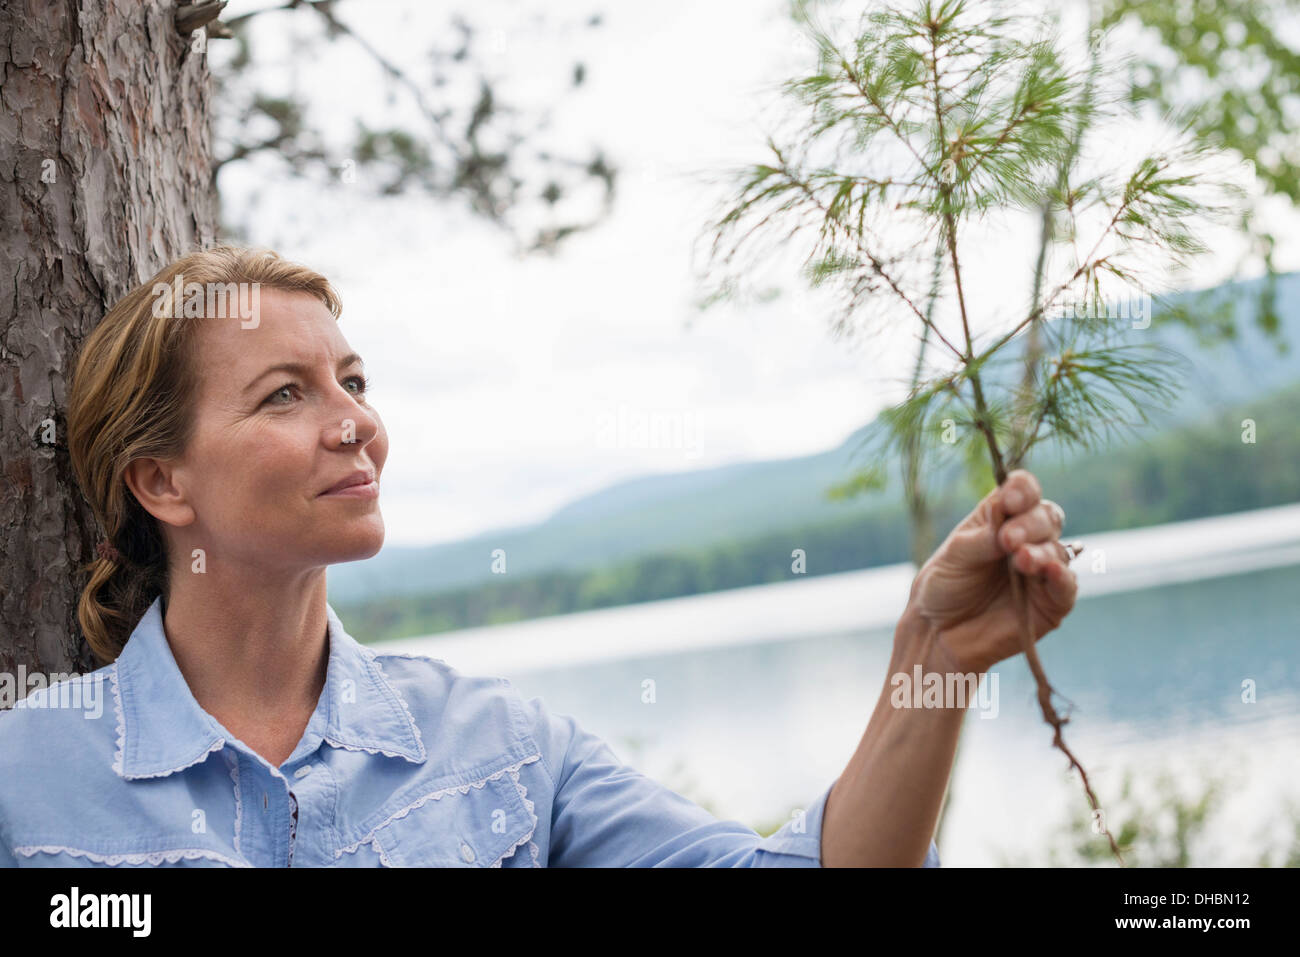 A woman standing among the trees on the shore of a lake in New York state. Stock Photo